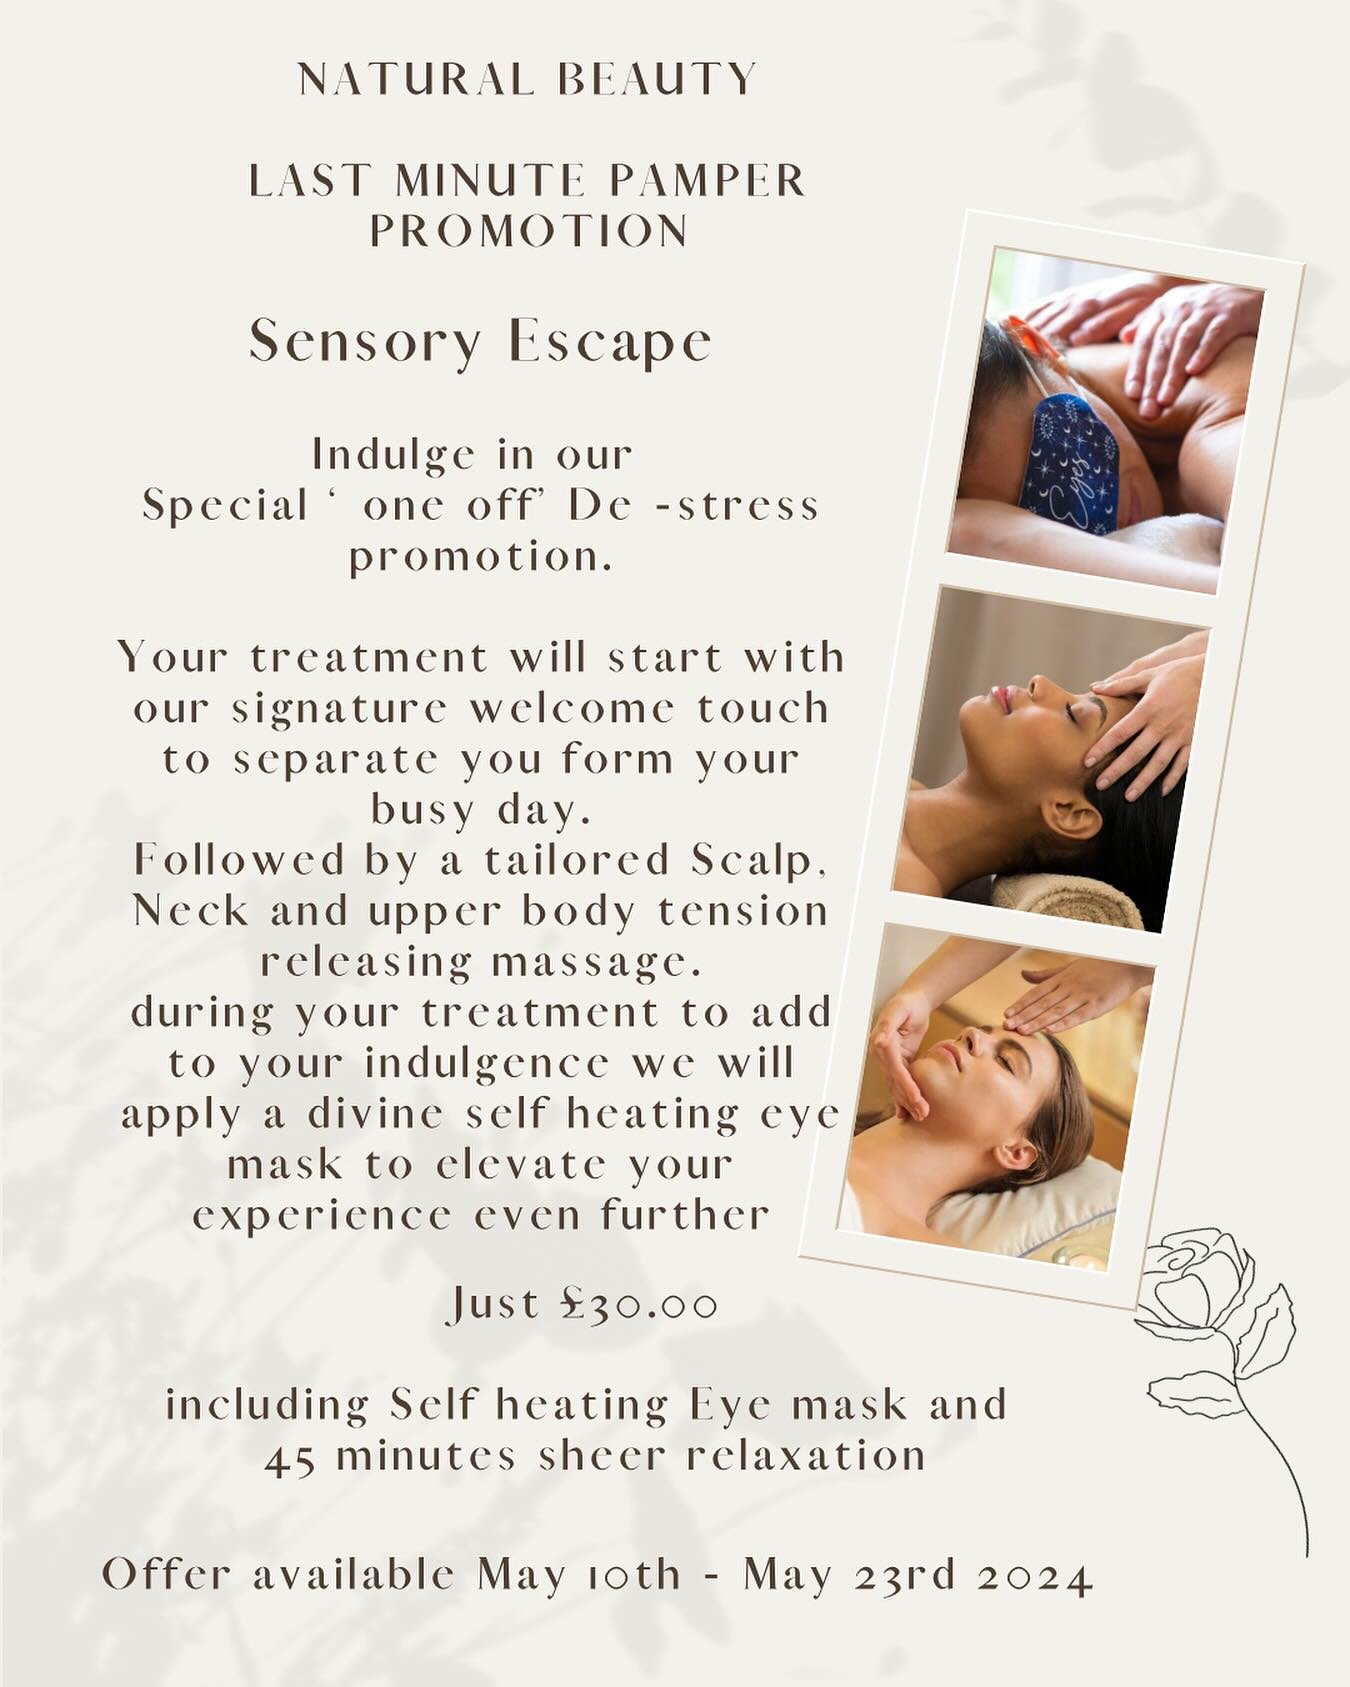 Last minute Pamper Promotion

Sensory Escape

Indulge in our Special &lsquo;one off&rsquo; De -stress promotion.

Your treatment will start with our signature welcome touch to separate you form your busy day.

Followed by a tailored Scalp, Neck and u